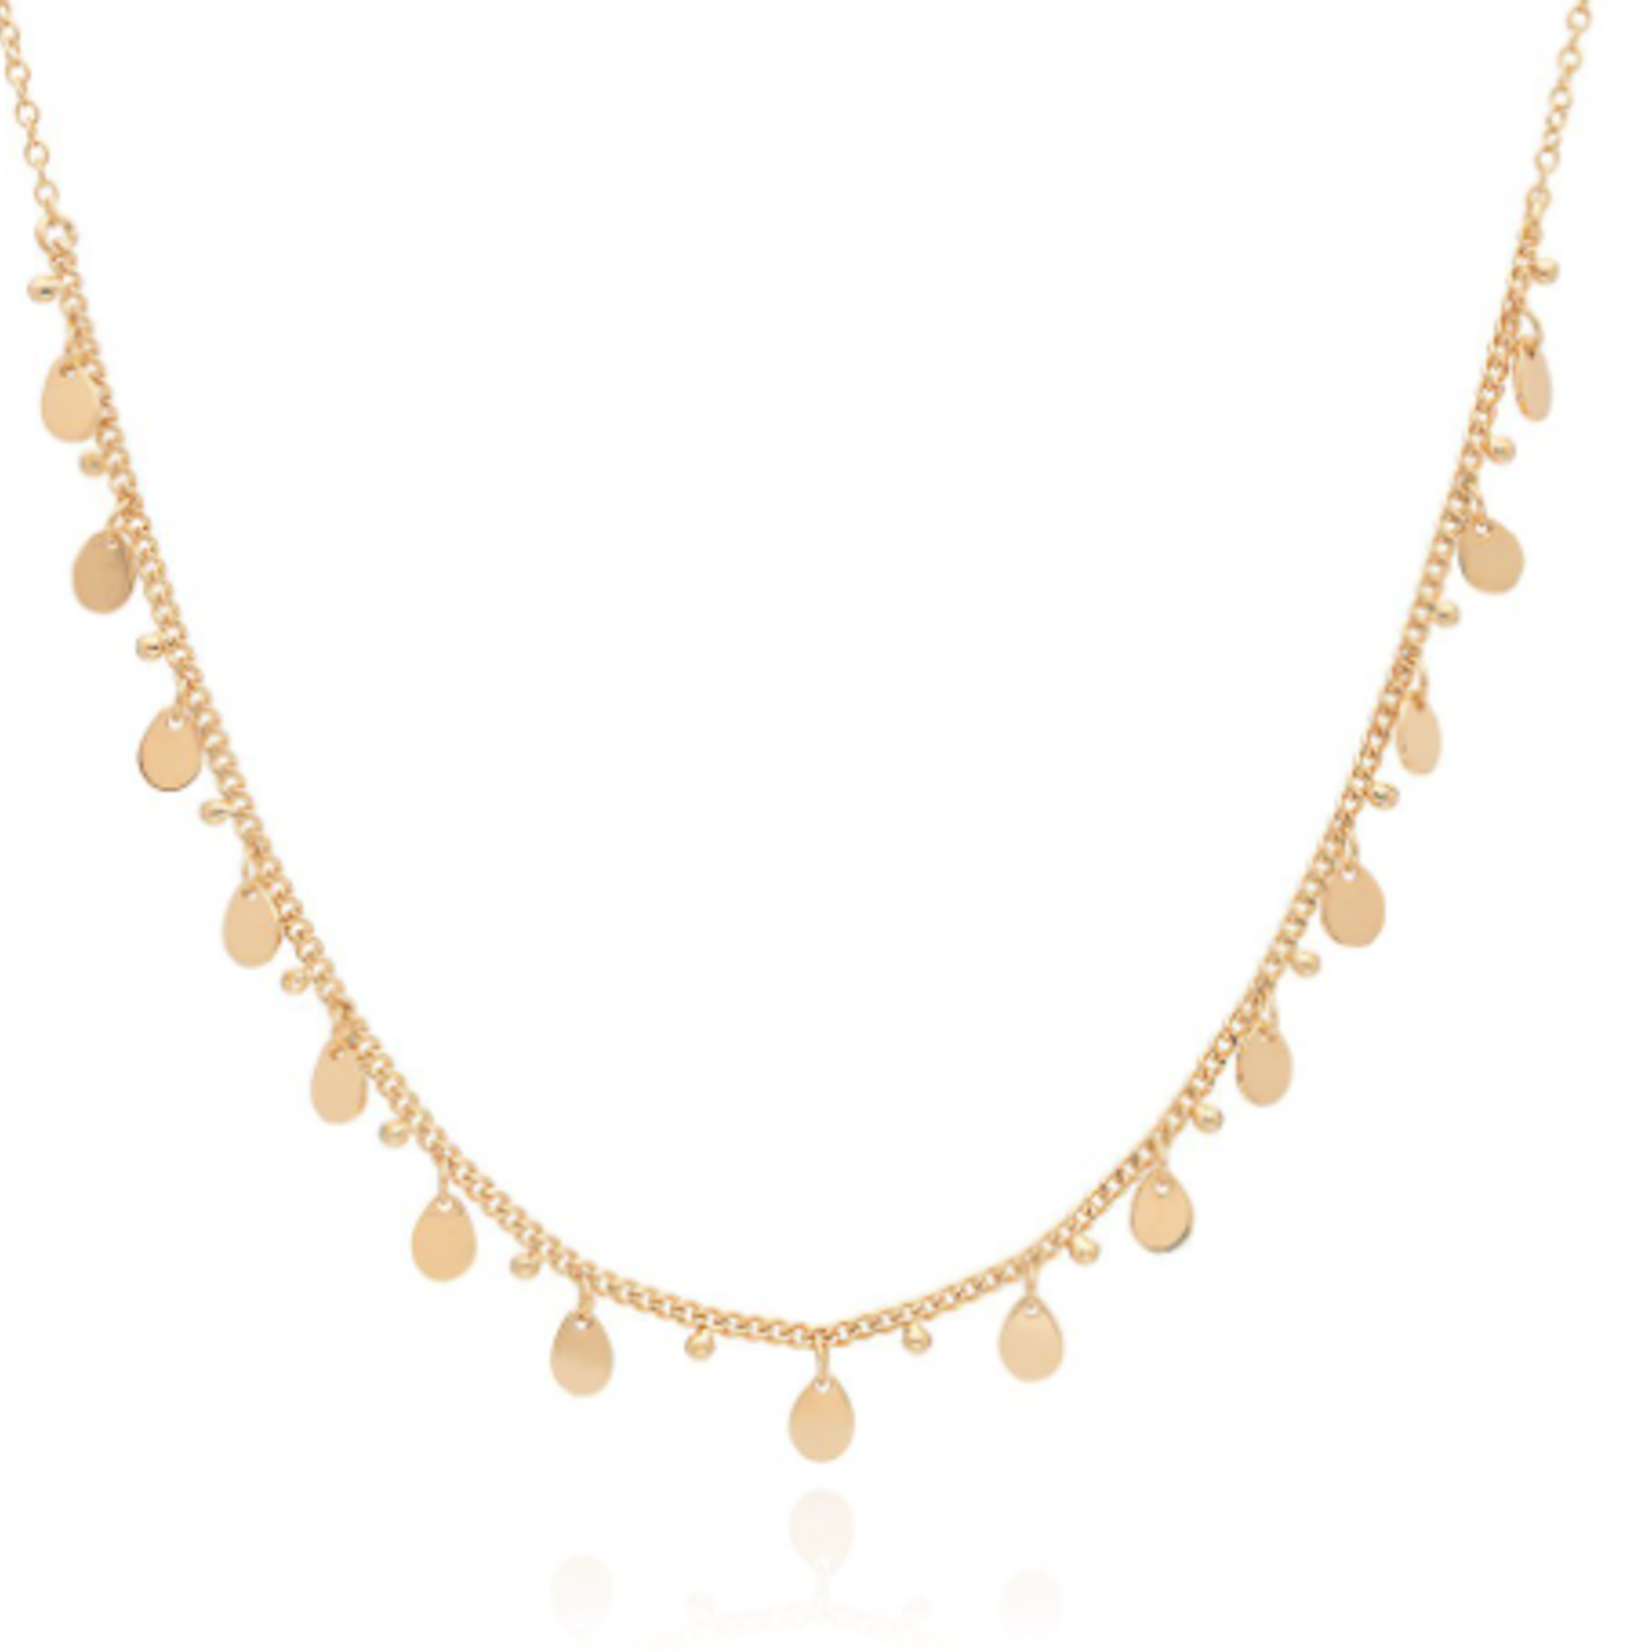 Classic charm collar necklace - 12’-14’ - 18k gold plate over sterling